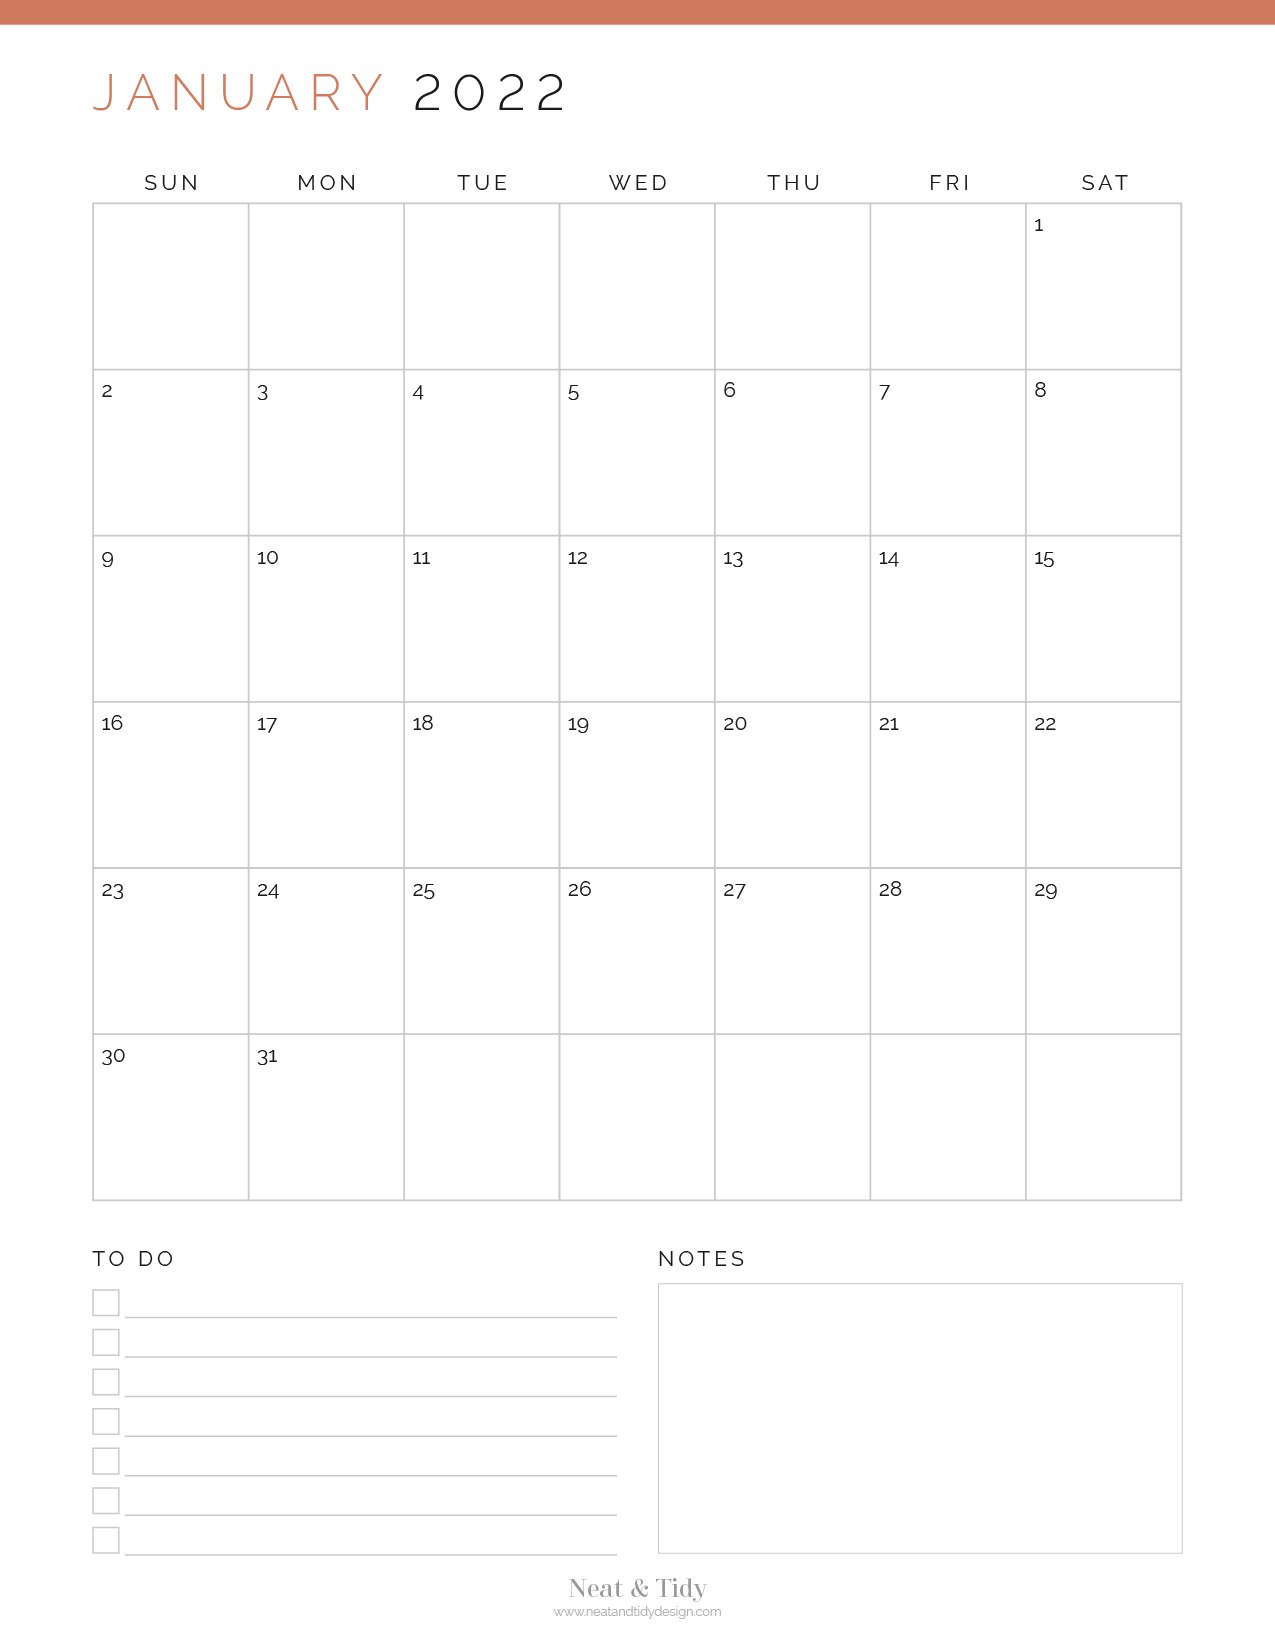 2022 Monthly Calendar - Neat and Tidy Design